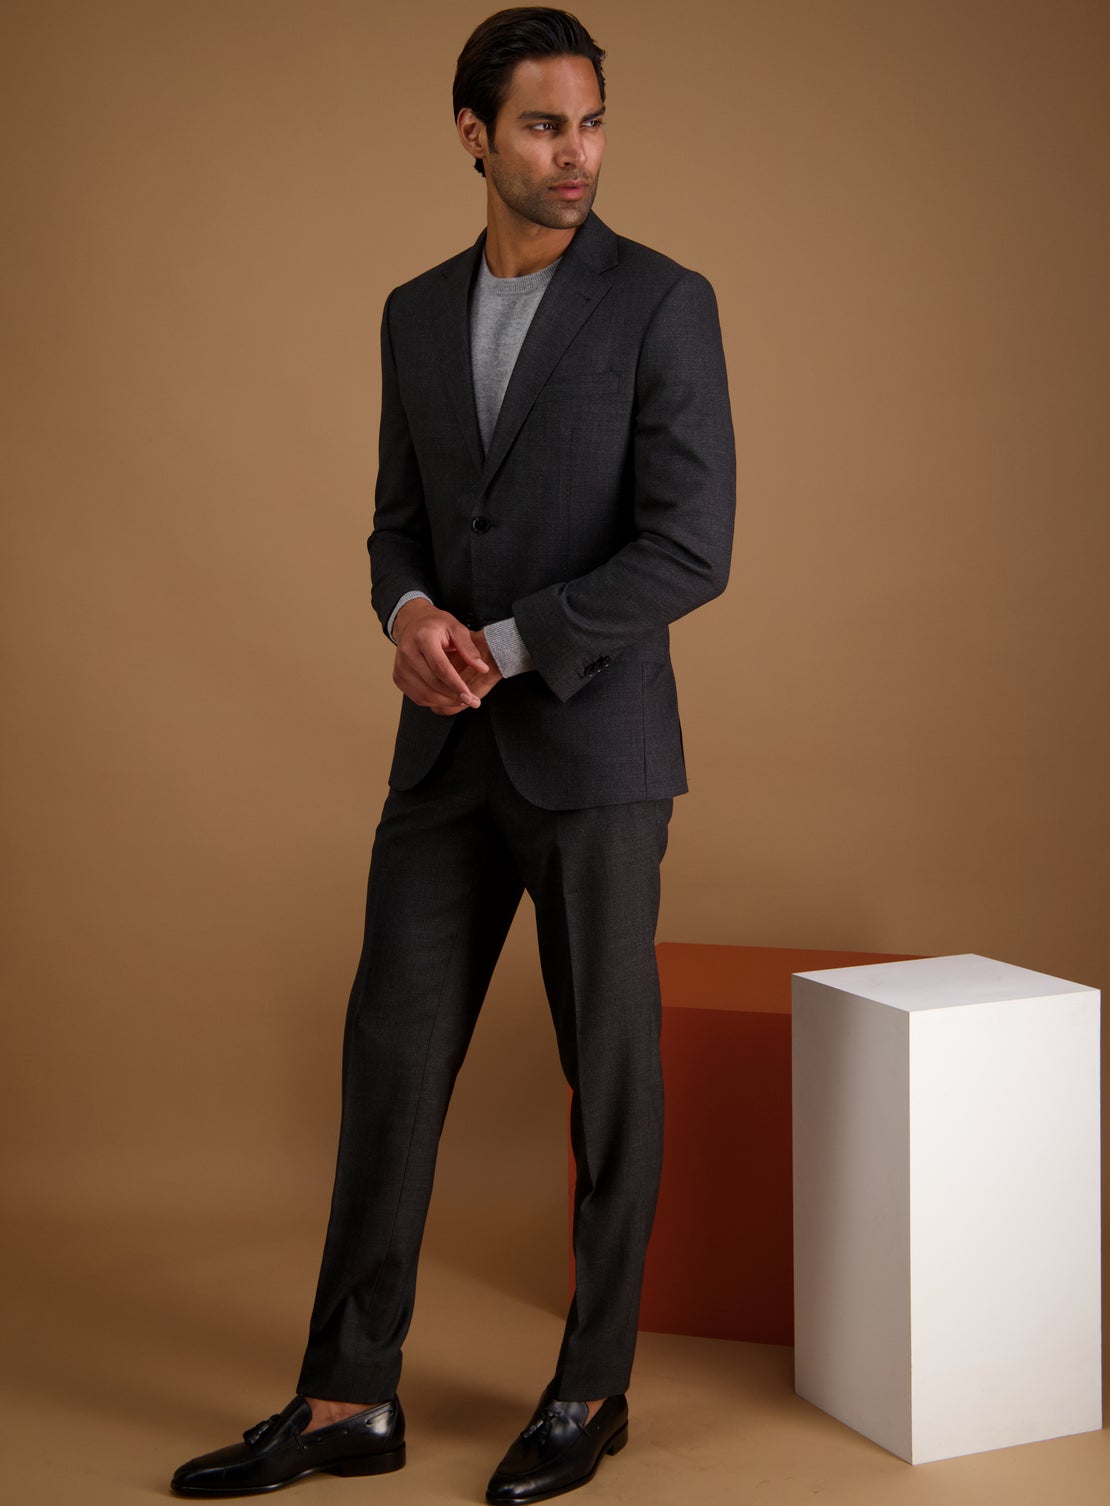 Tyrone Charcoal Textured Suit